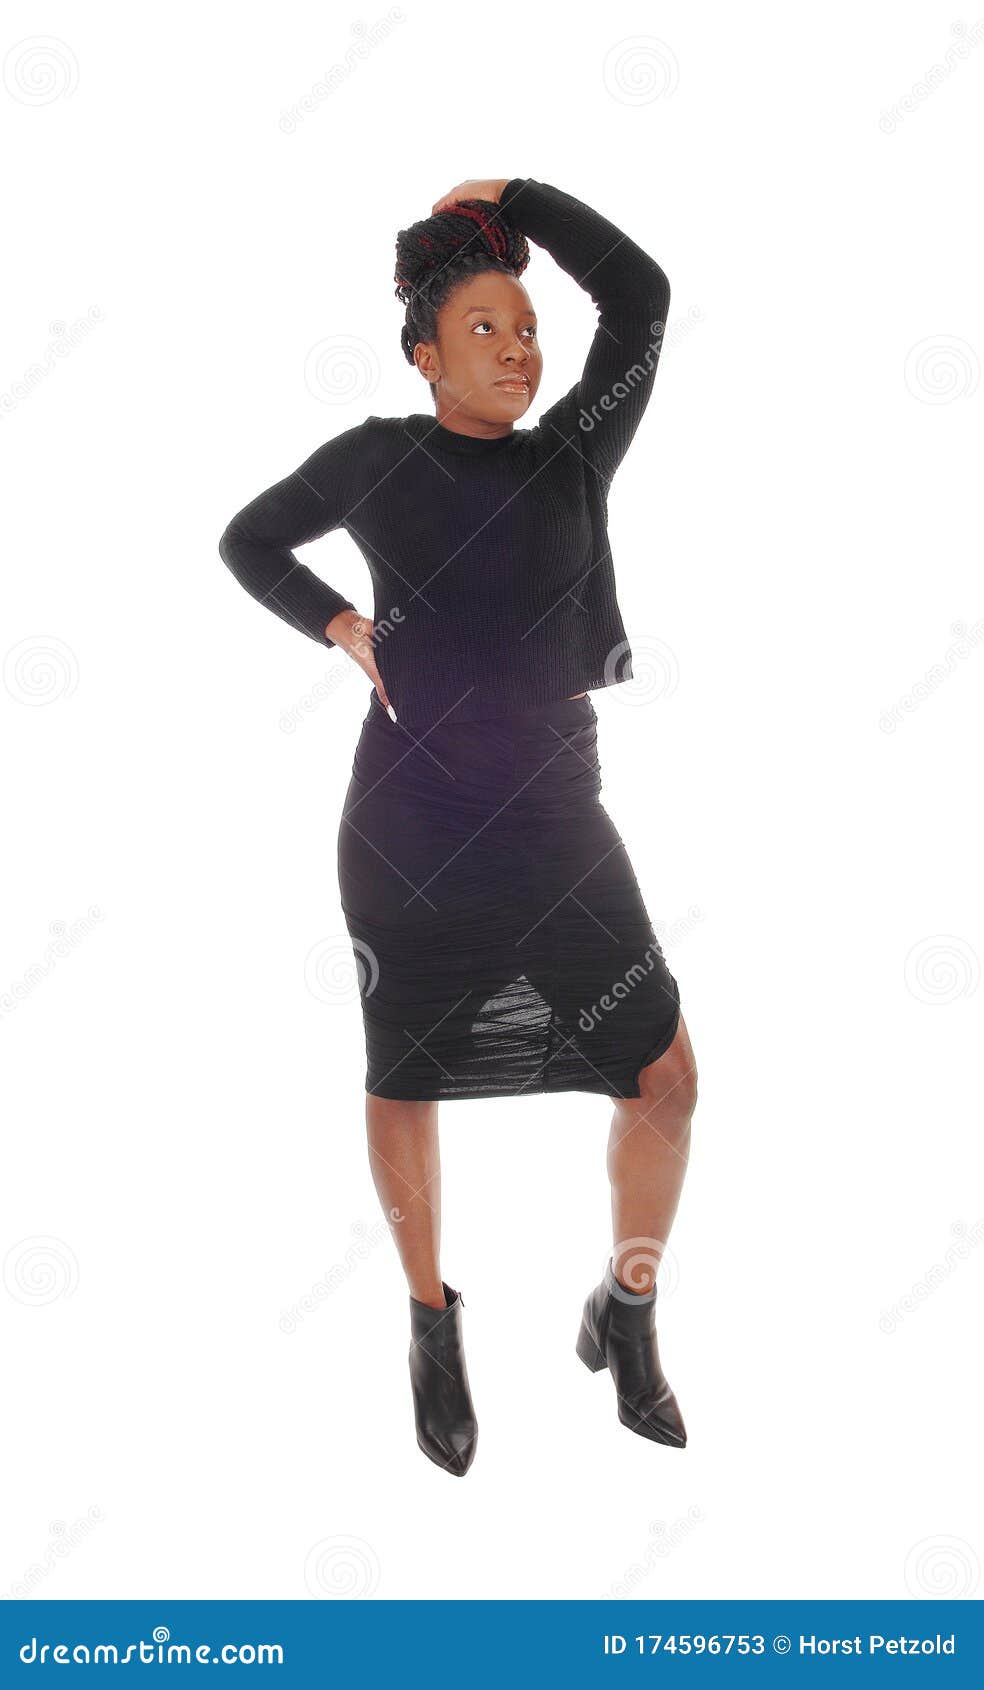 An African Woman Standing in a Black Dress Waist Up Stock Image - Image ...